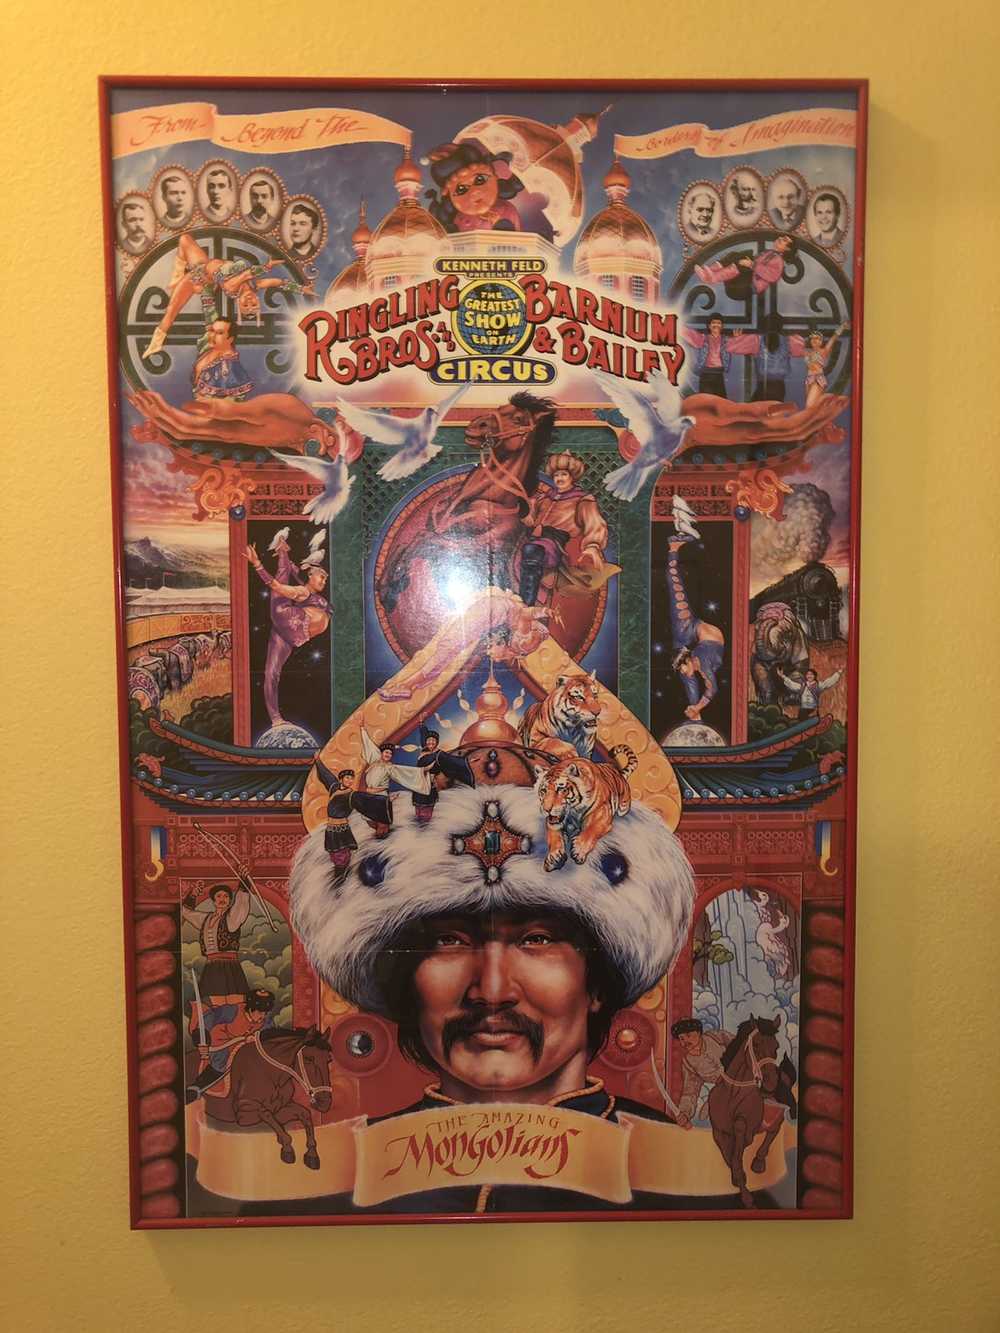 The Old Circus Vintage 1993 Ringling bros poster - image 1